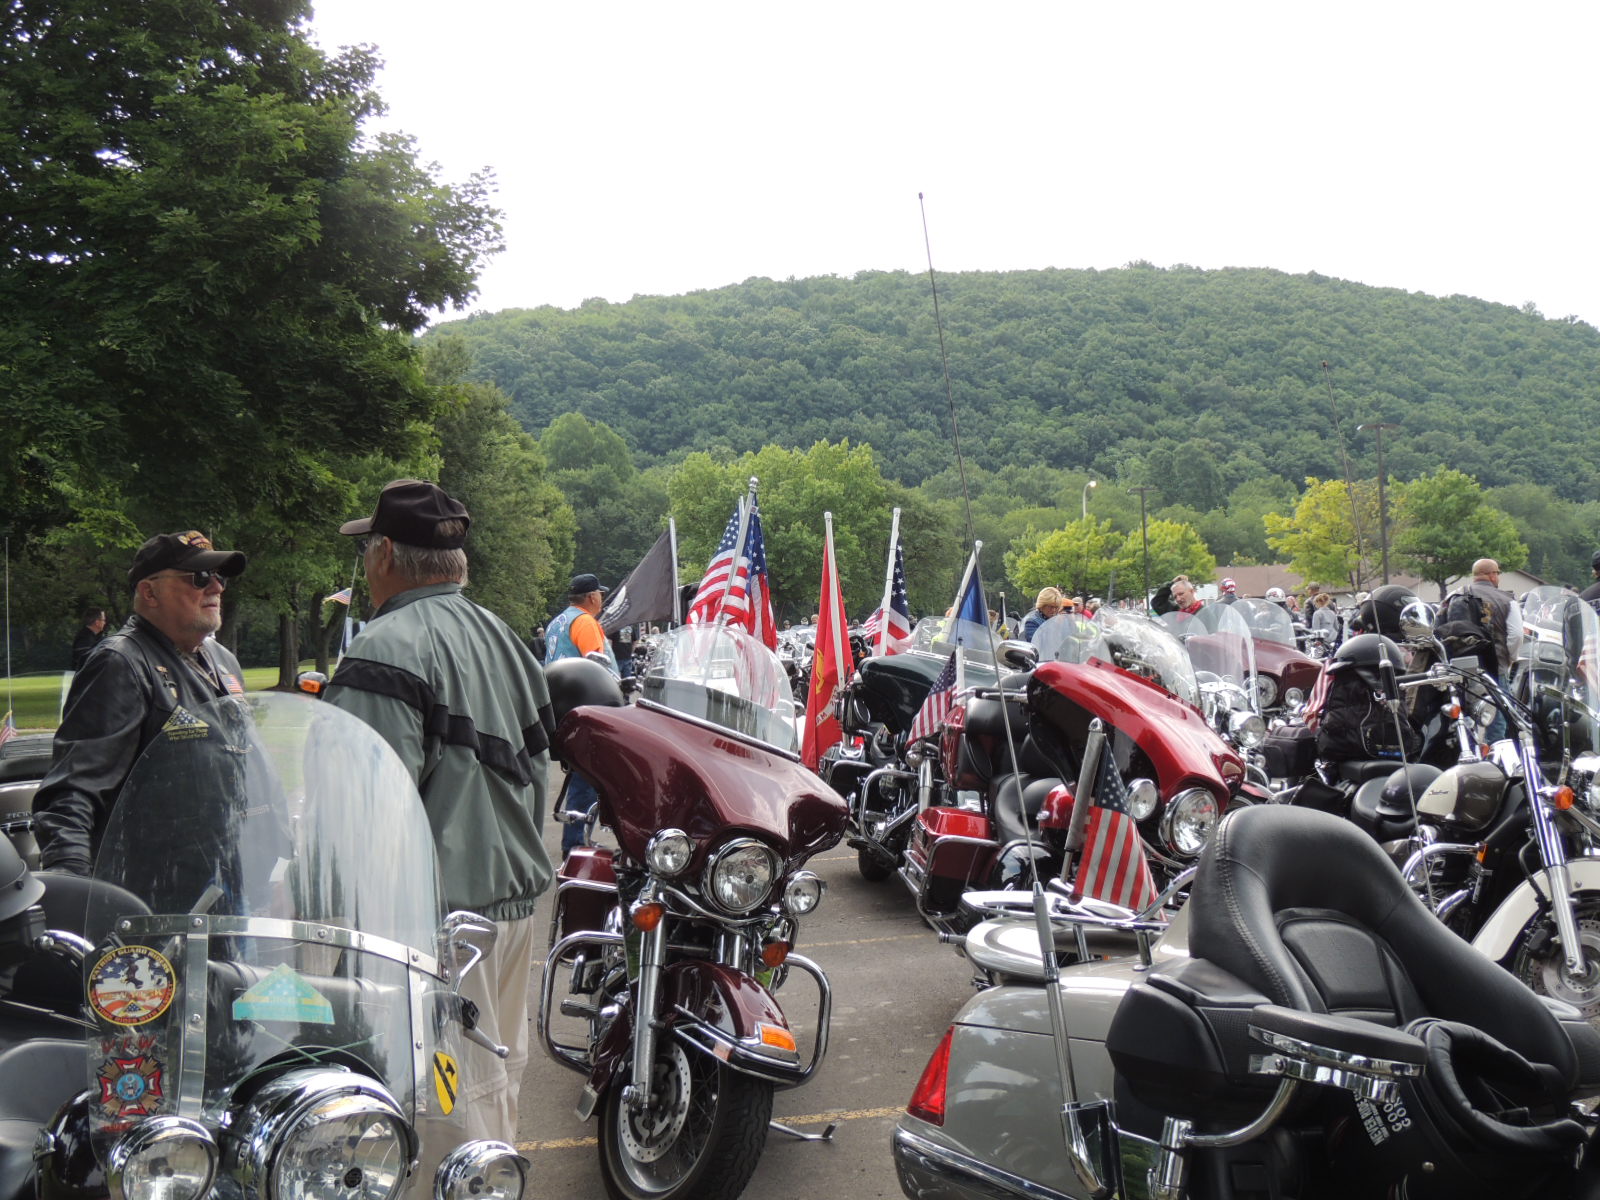 Vietnam Veterans Memorial Highway of Valor Tribute Ride to take place on July 11